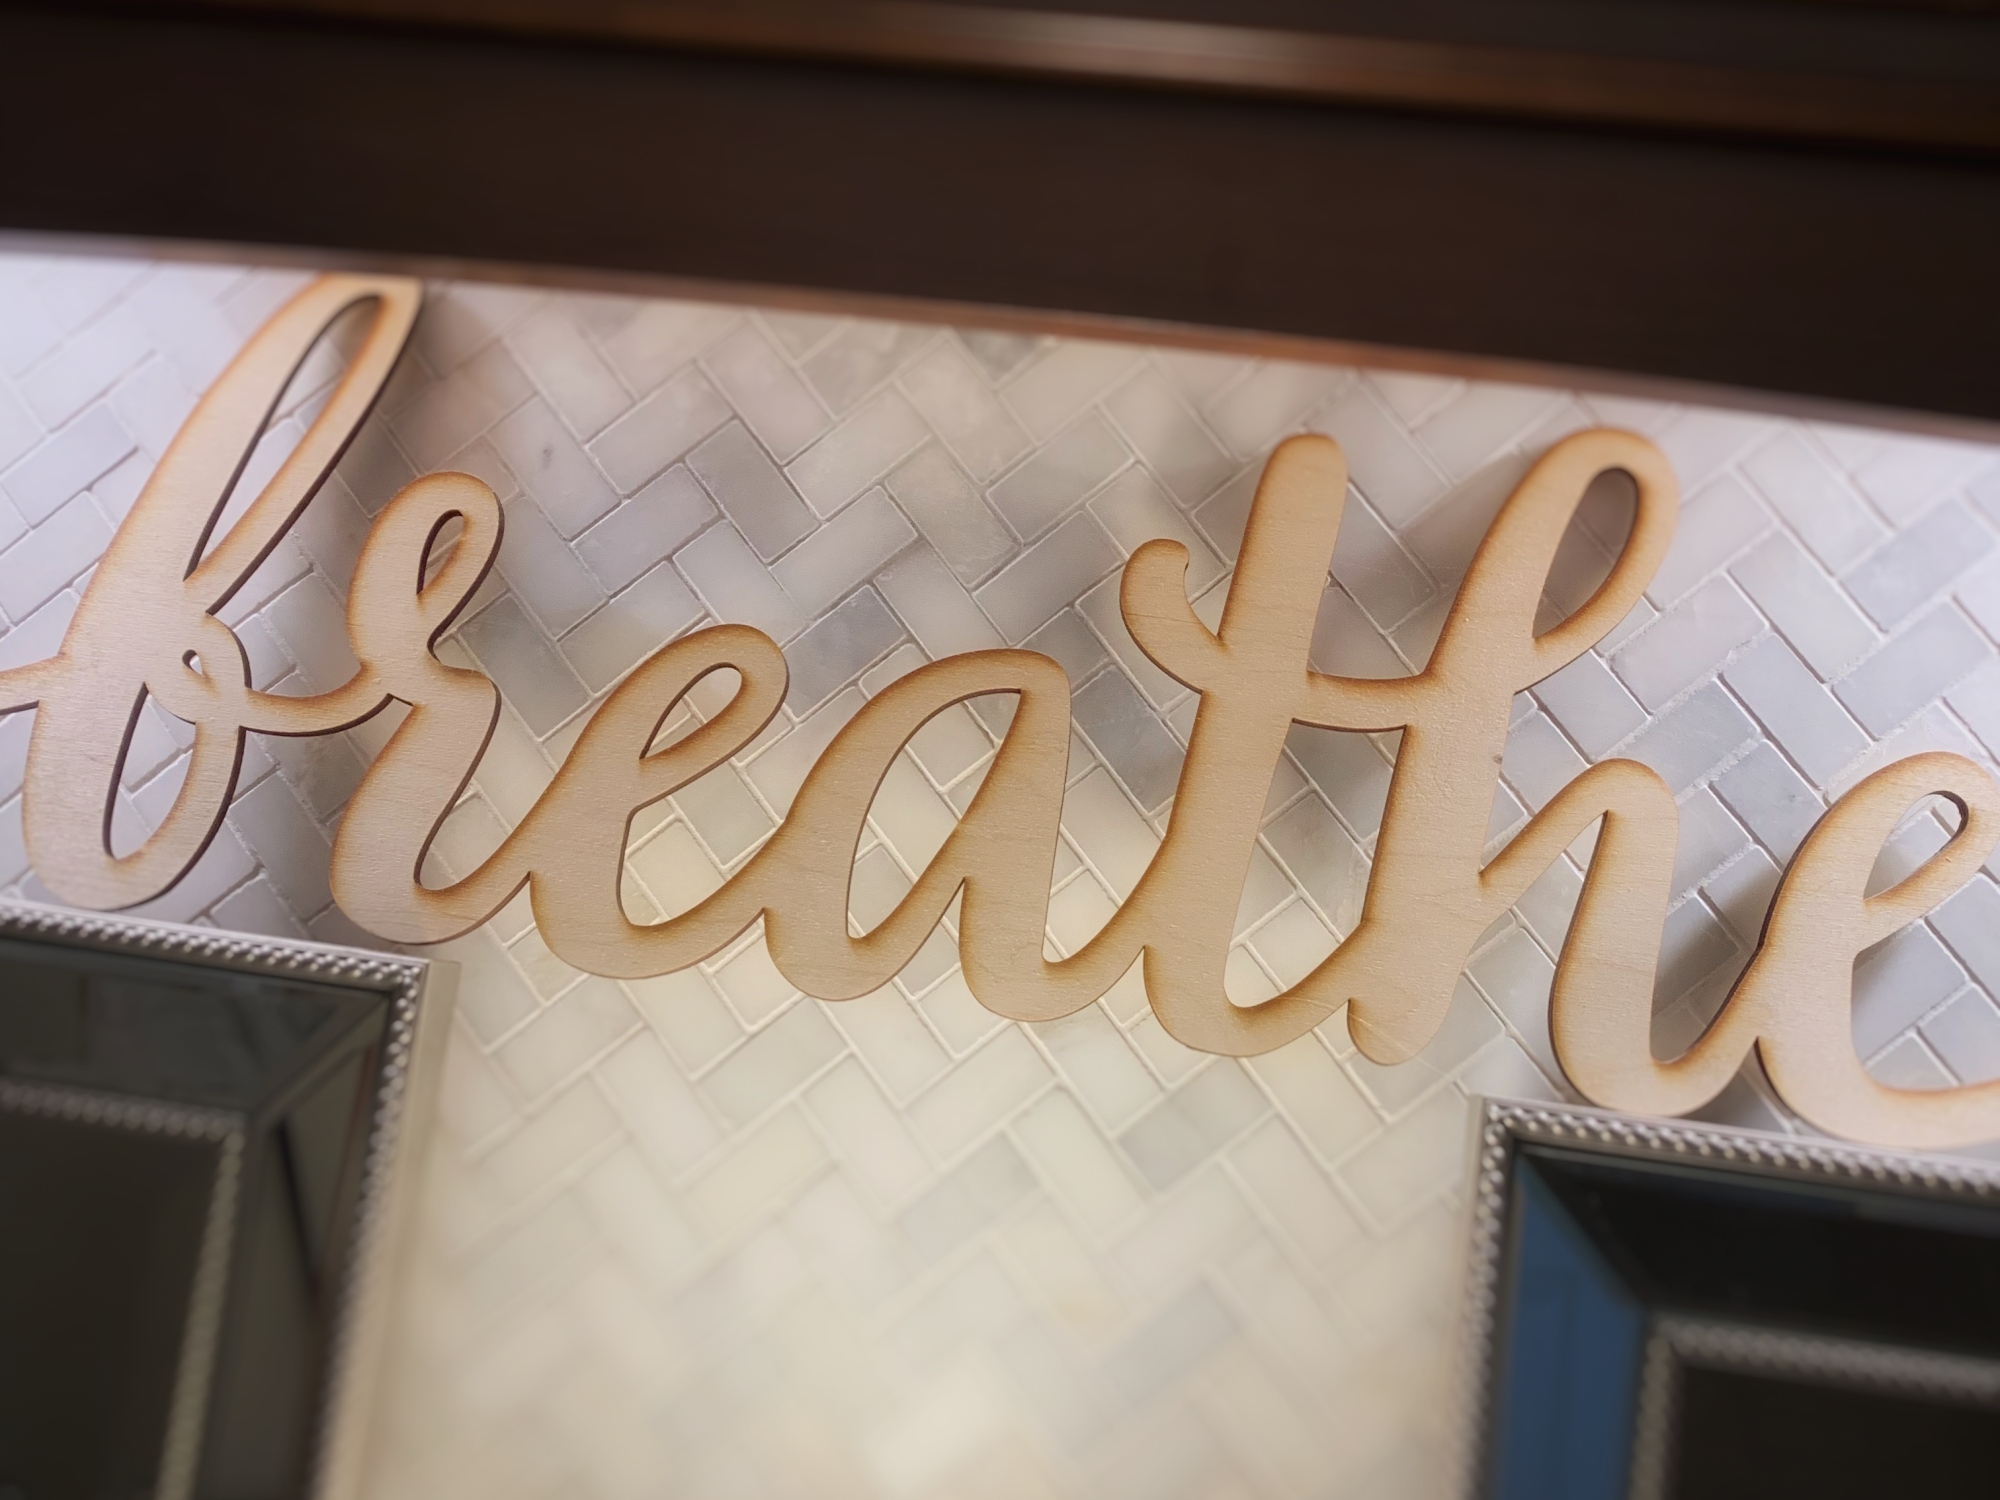 Wood cut sign that says "breathe" in script